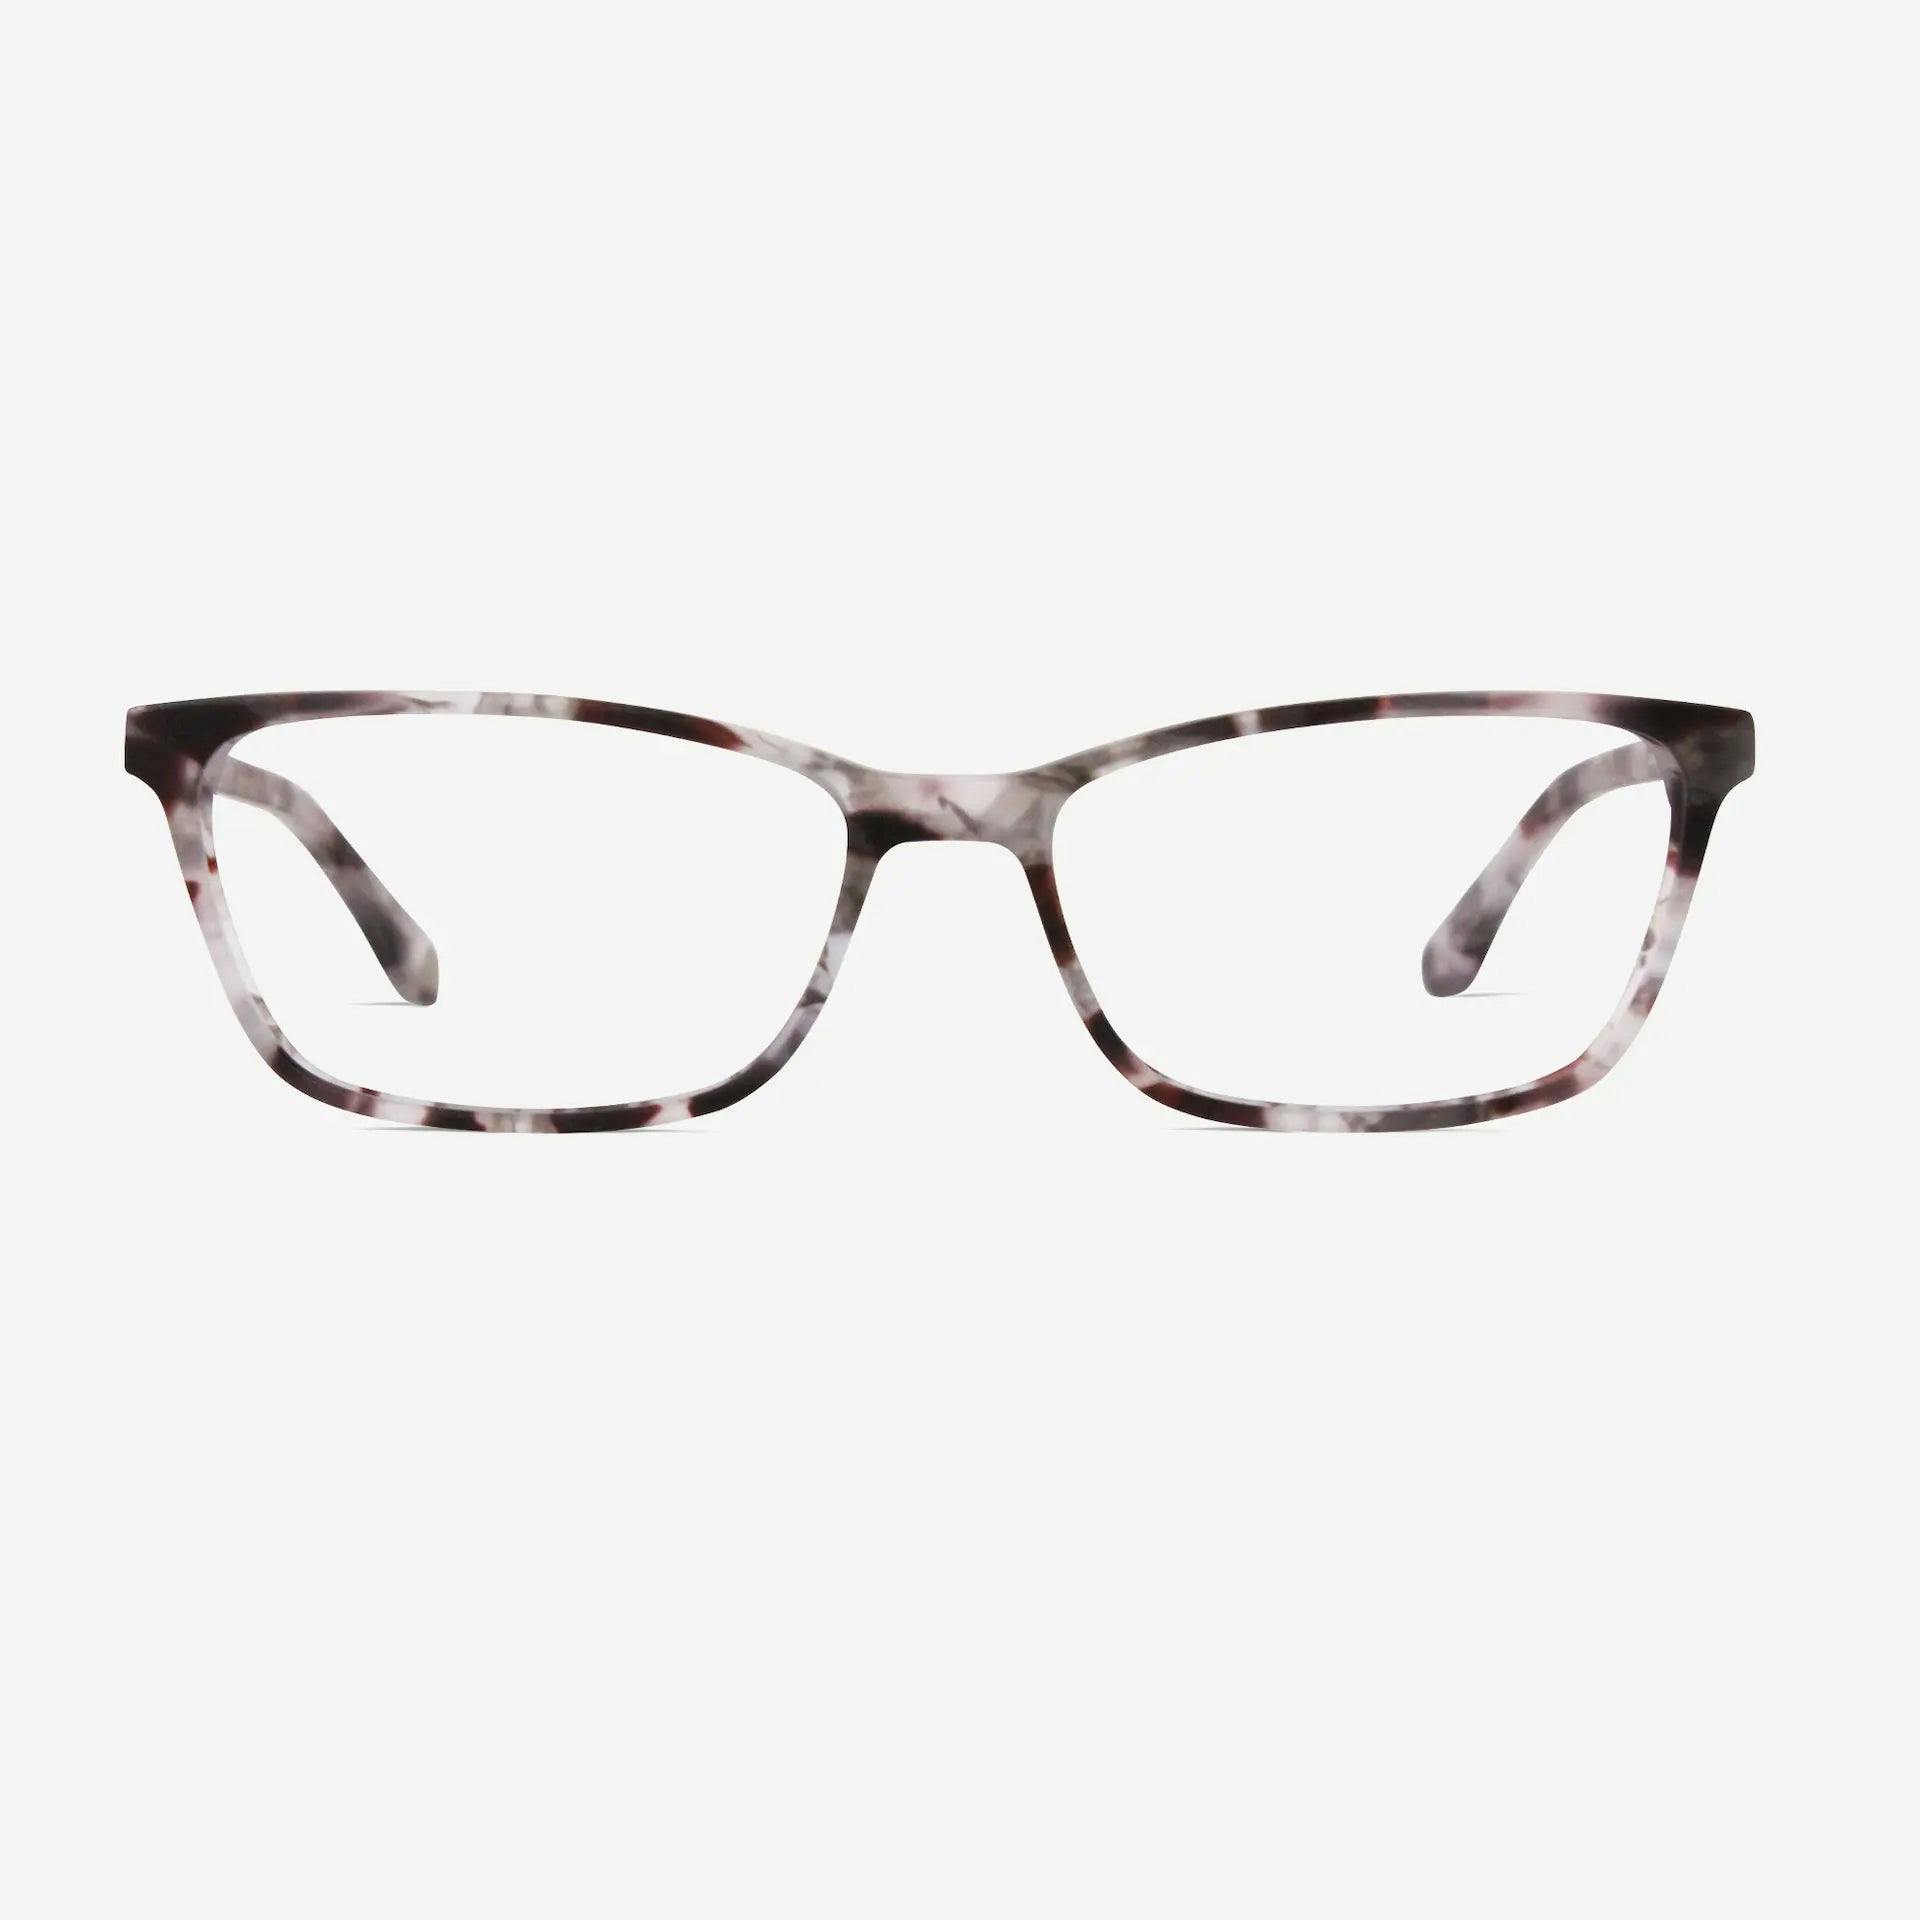 Huxley glasses | Lucy Red Tortoise 